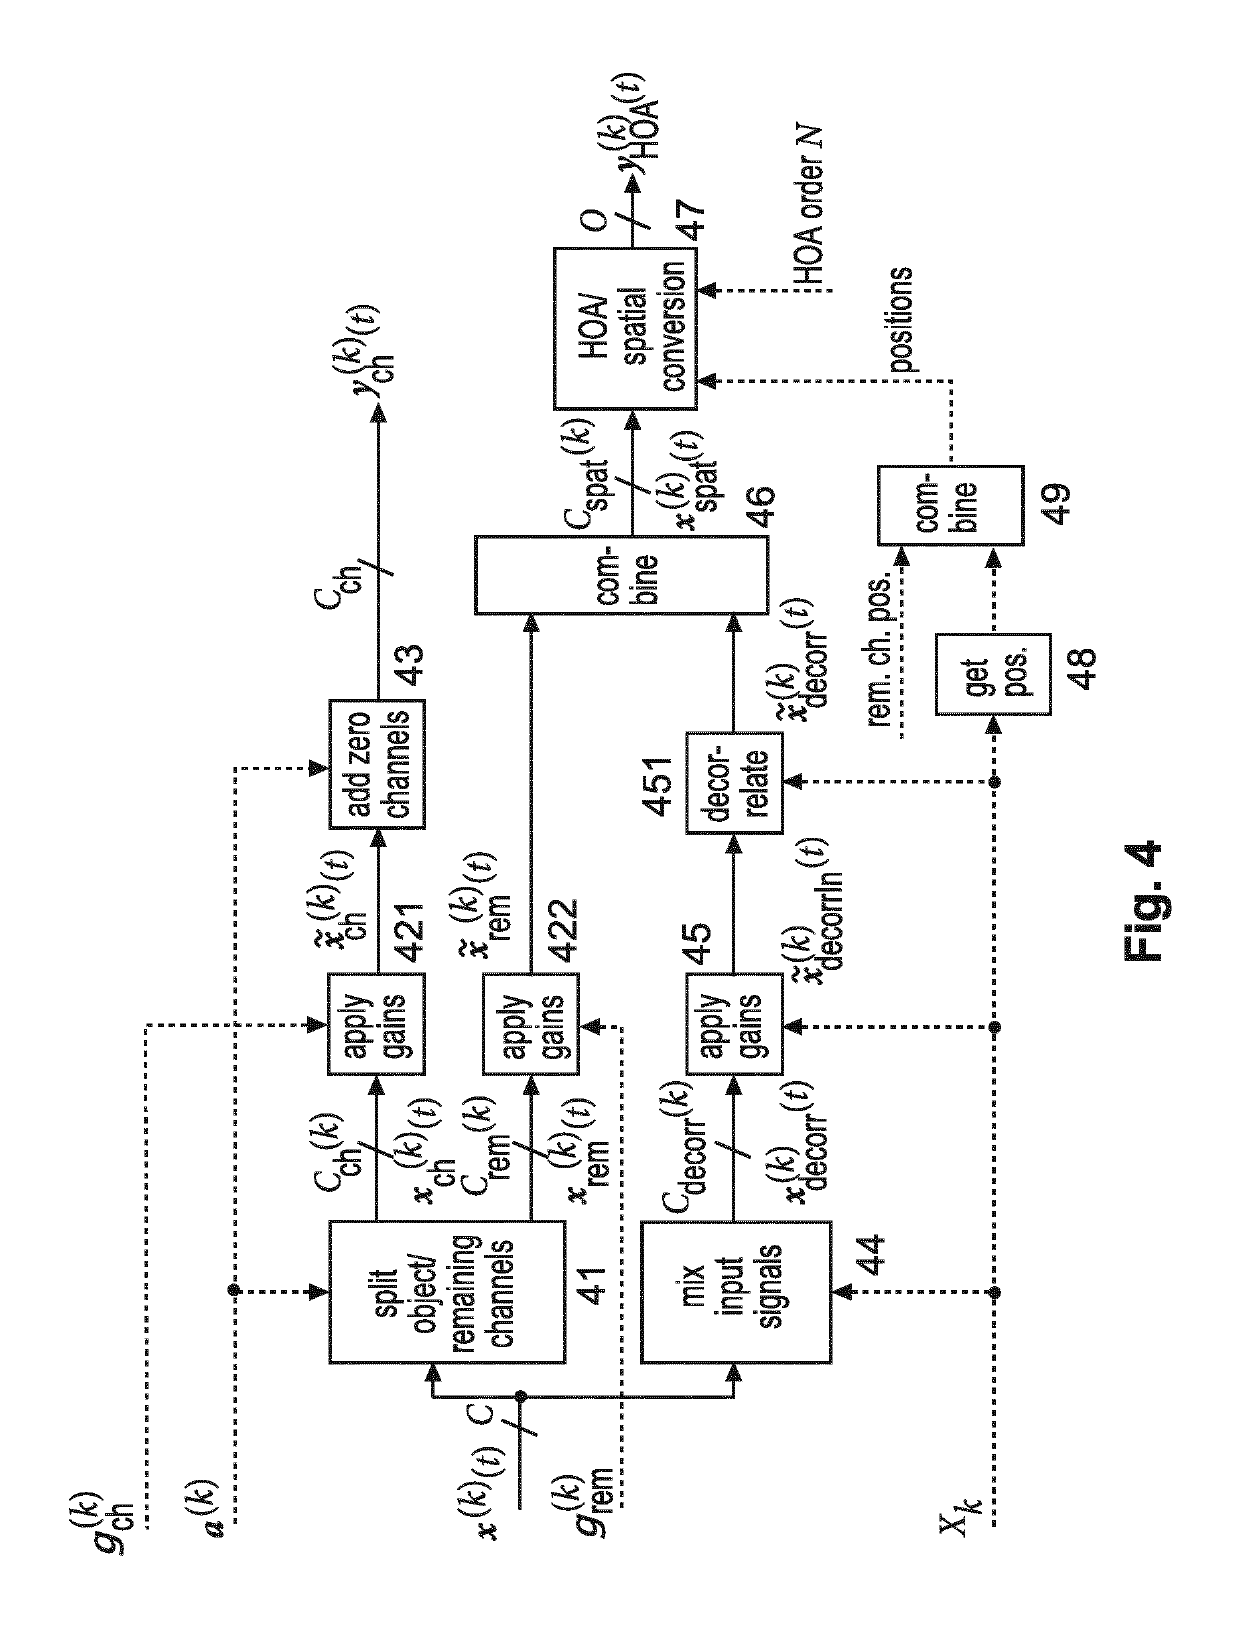 Method and apparatus for generating from a multi-channel 2D audio input signal a 3D sound representation signal